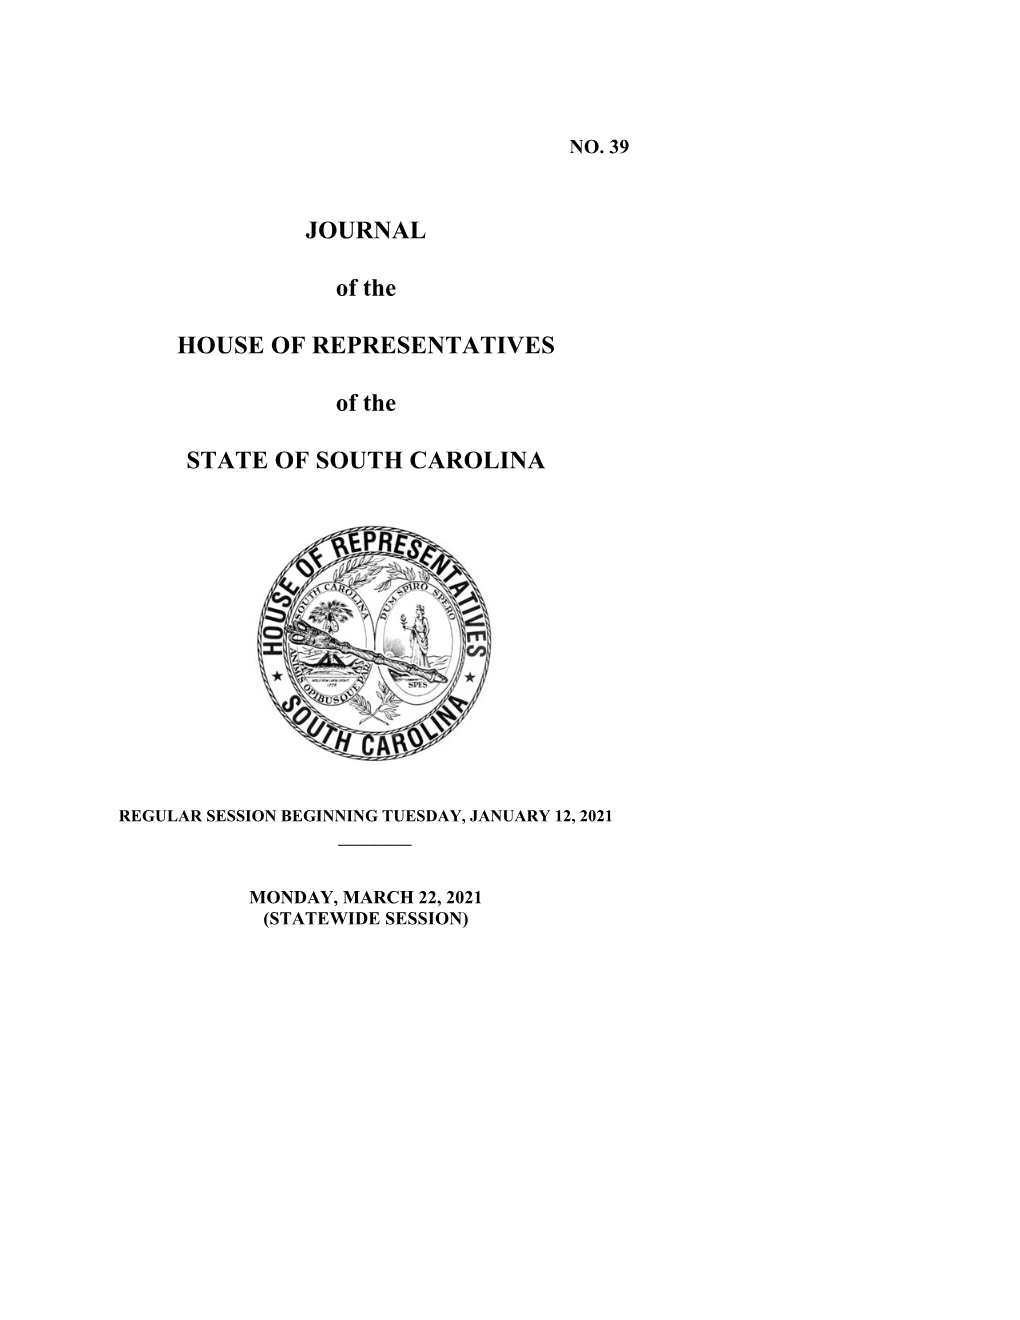 JOURNAL of the HOUSE of REPRESENTATIVES of the STATE of SOUTH CAROLINA